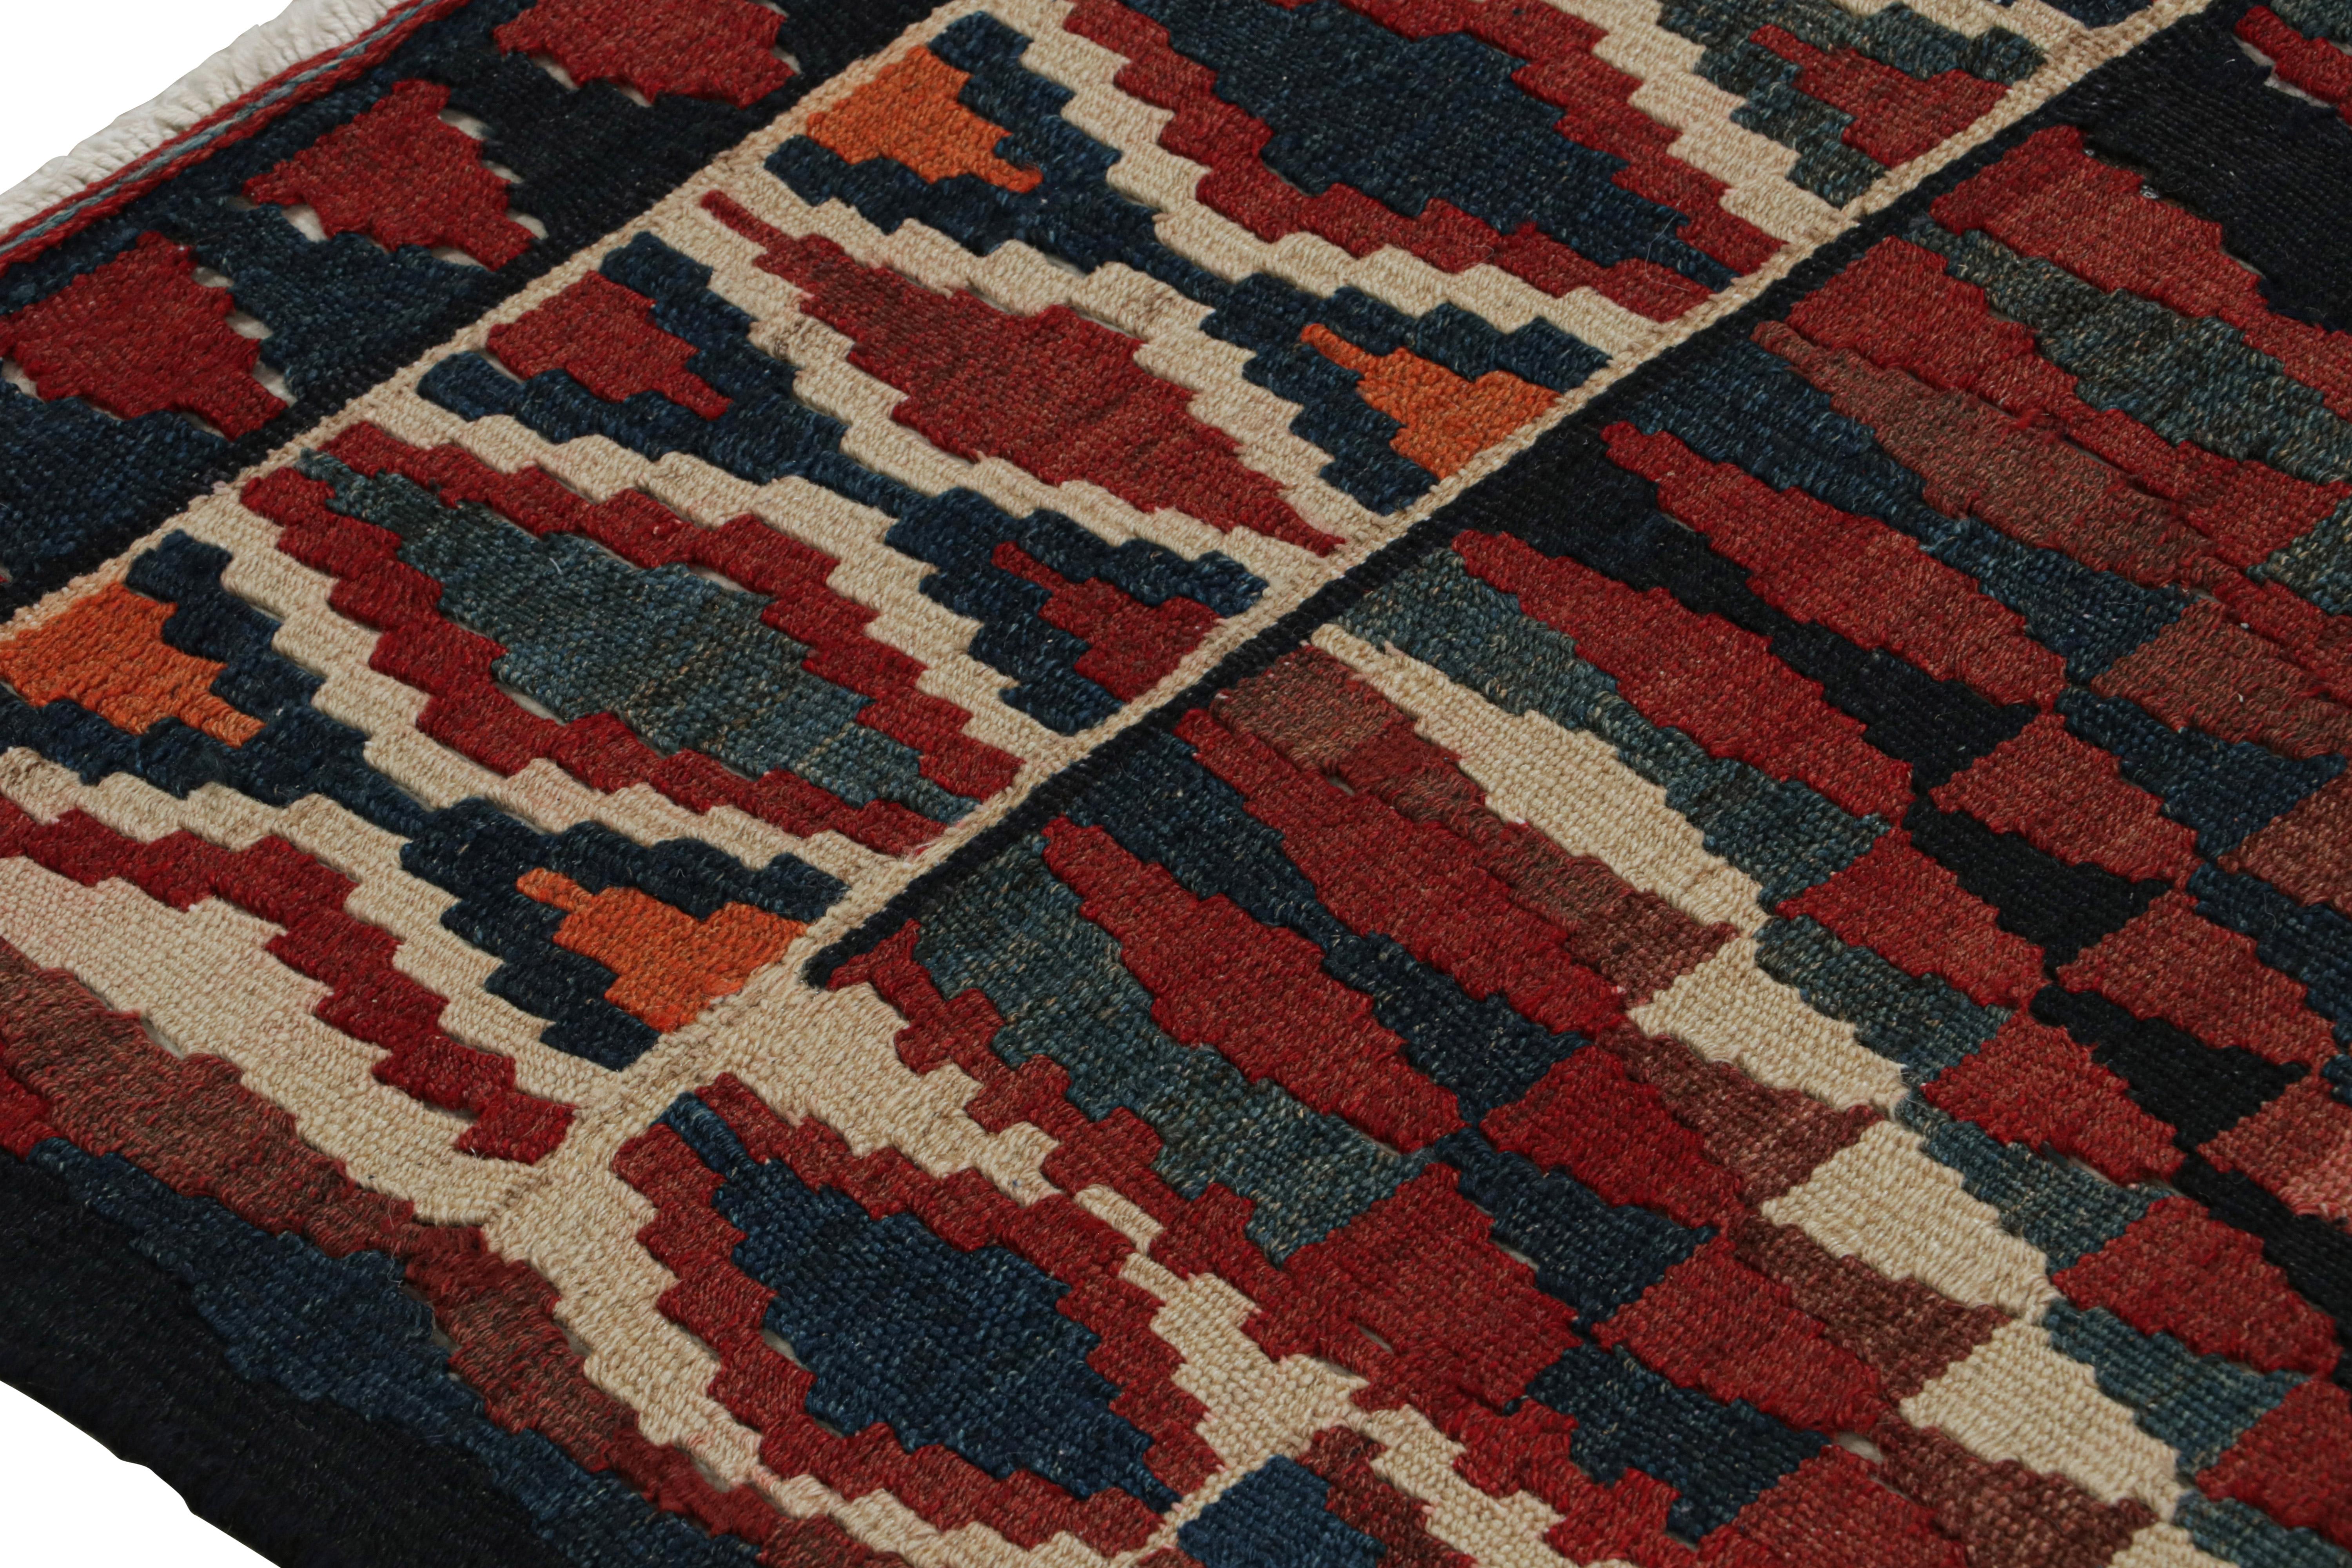 Mid-20th Century Vintage Afghan Tribal Kilim with Colorful Geometric Patterns, from Rug & Kilim For Sale